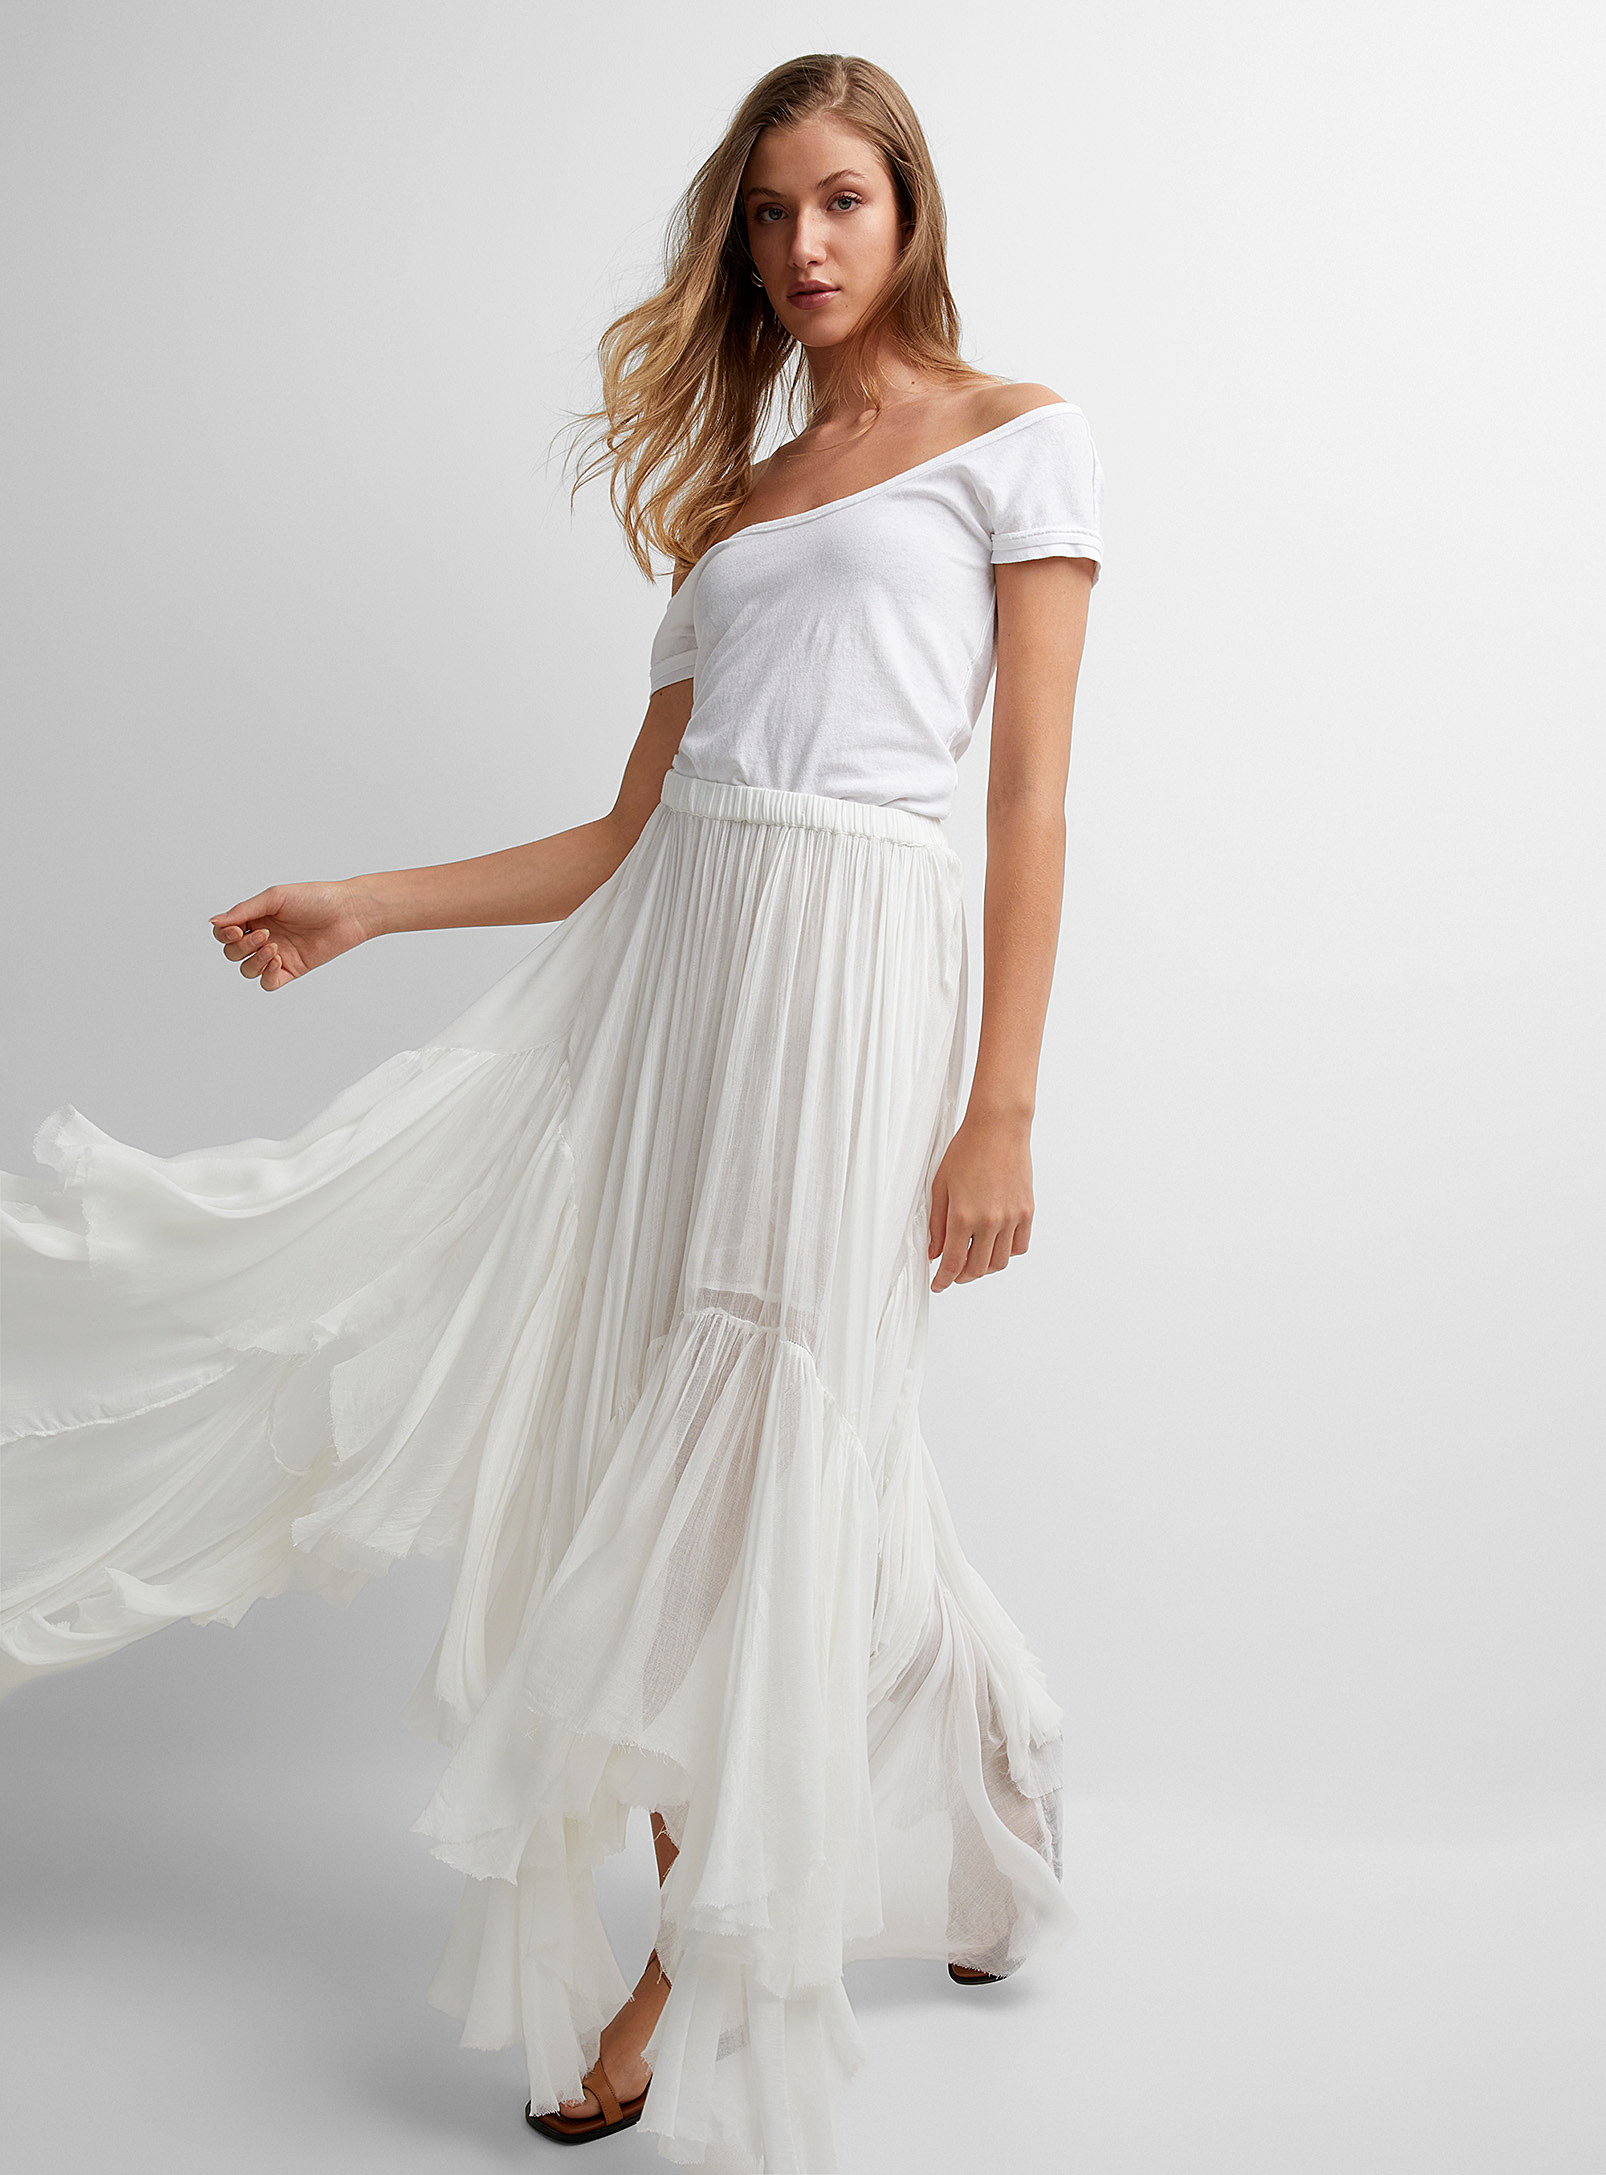 Free People - Women's One Clover ivory tiered maxi skirt